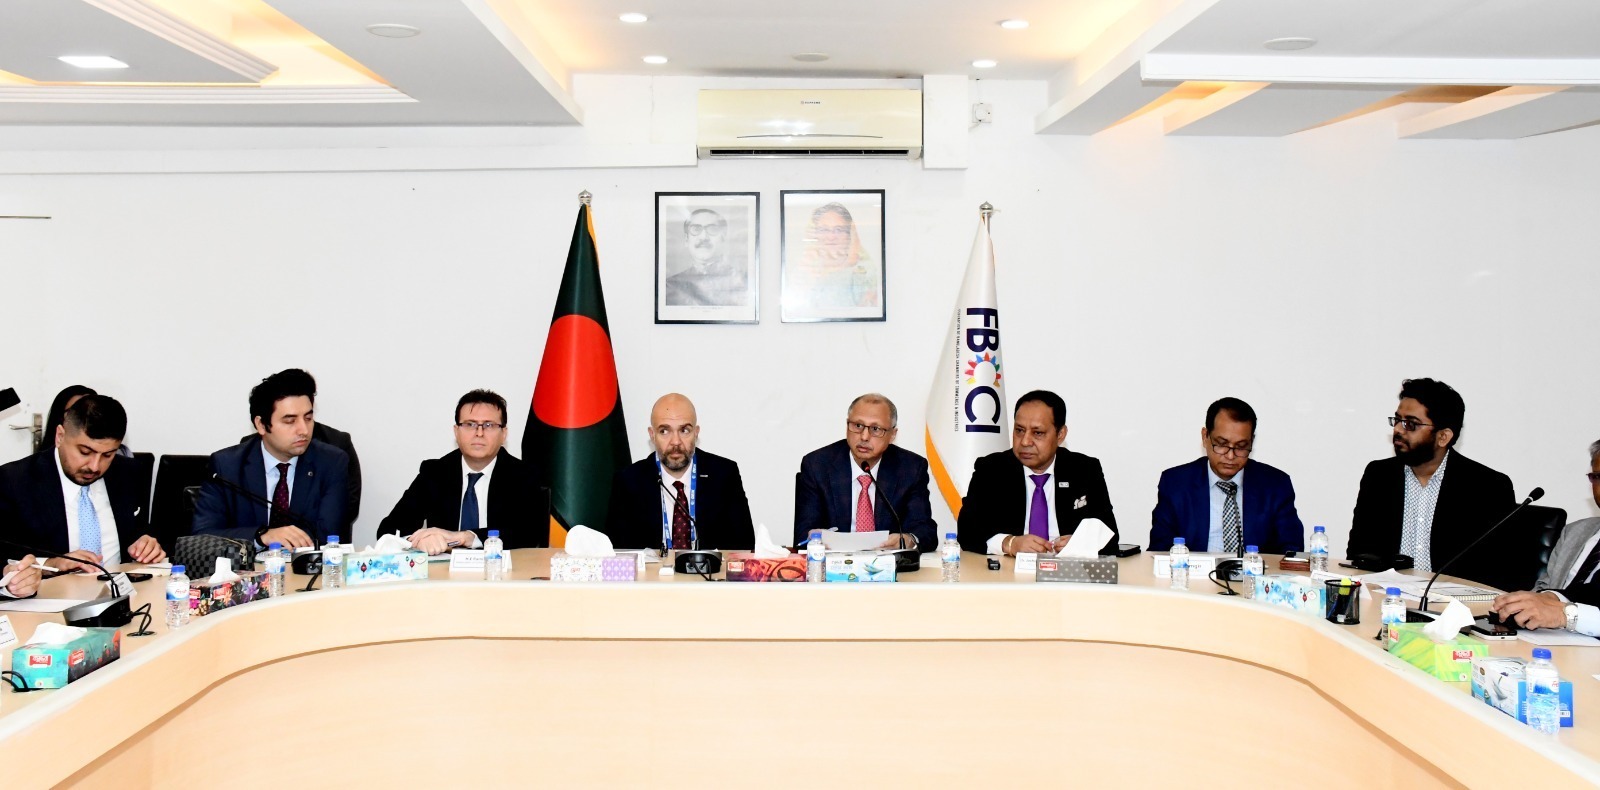 Bangladesh, Turkey poised to be gateways of trade between Europe, South and Southeast Asia